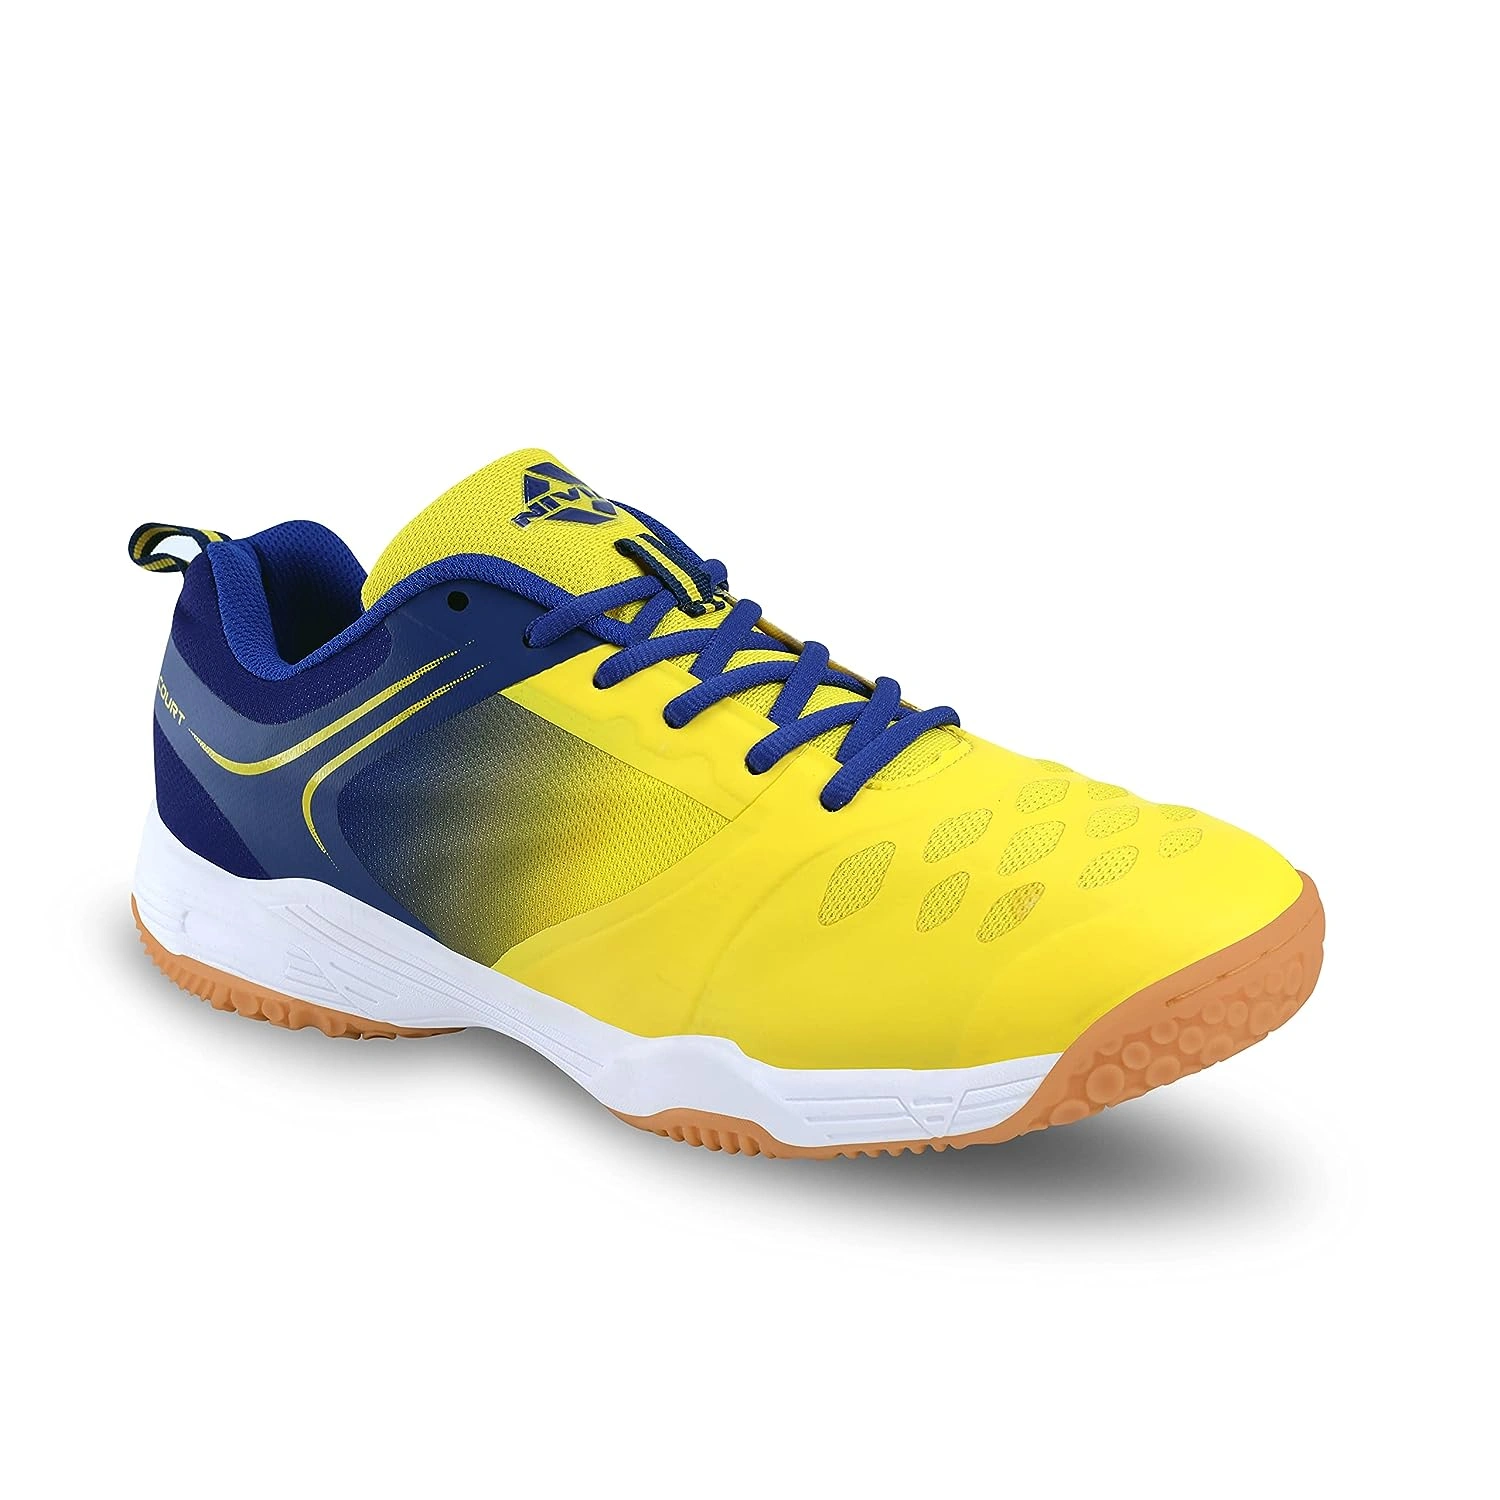 Nivia Hy-Court 2.0 Kids Badminton Shoes-YELLOW RBLUE-S13-1